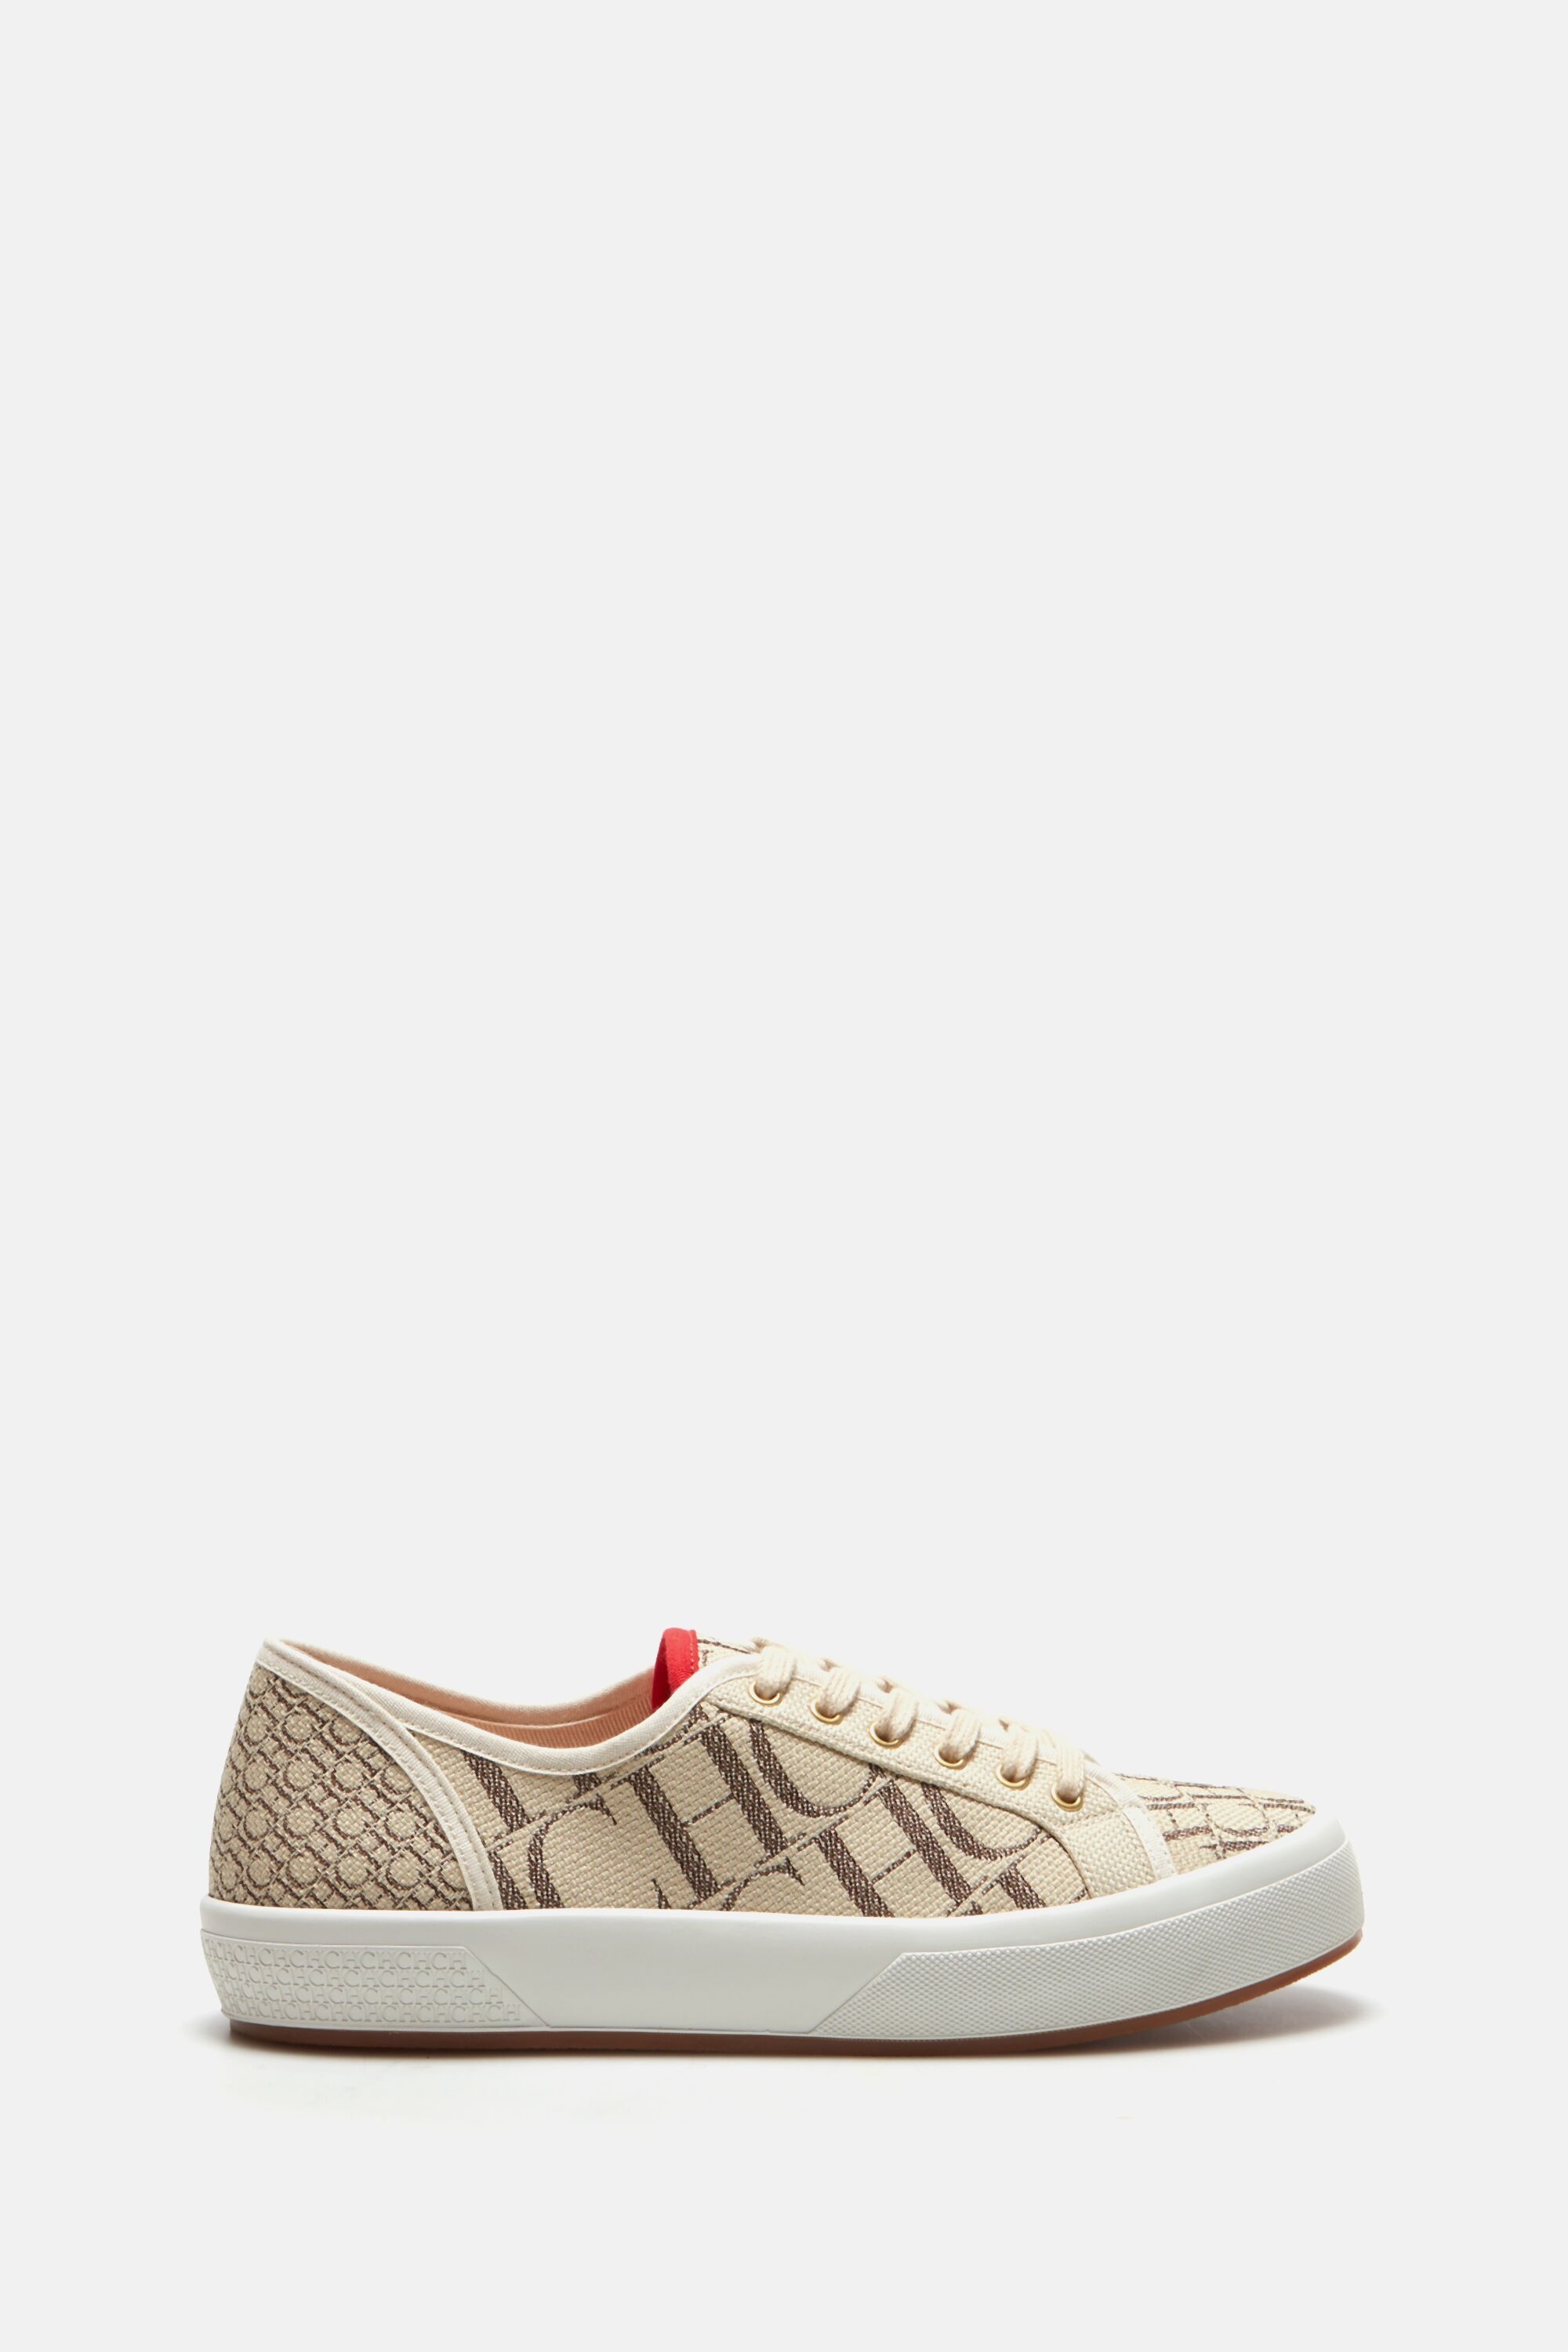 Leather sneakers with canvas heels white/caracas - CH Carolina